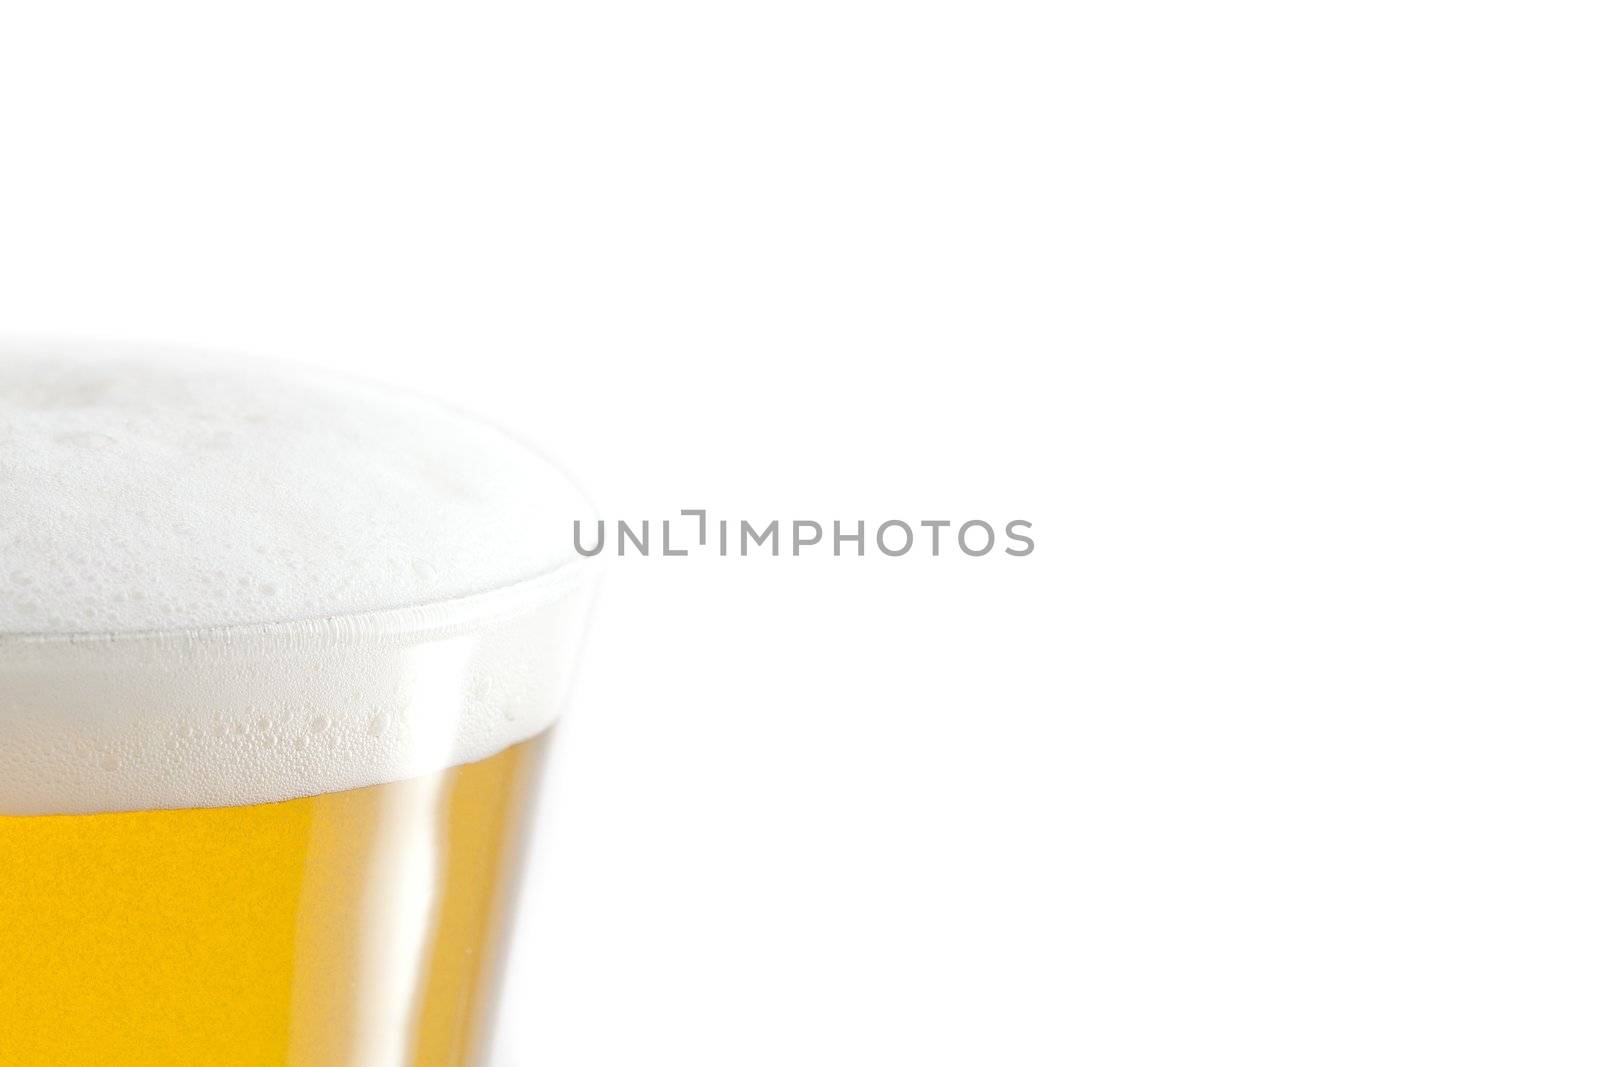 Full glass of beer and foam against a white background